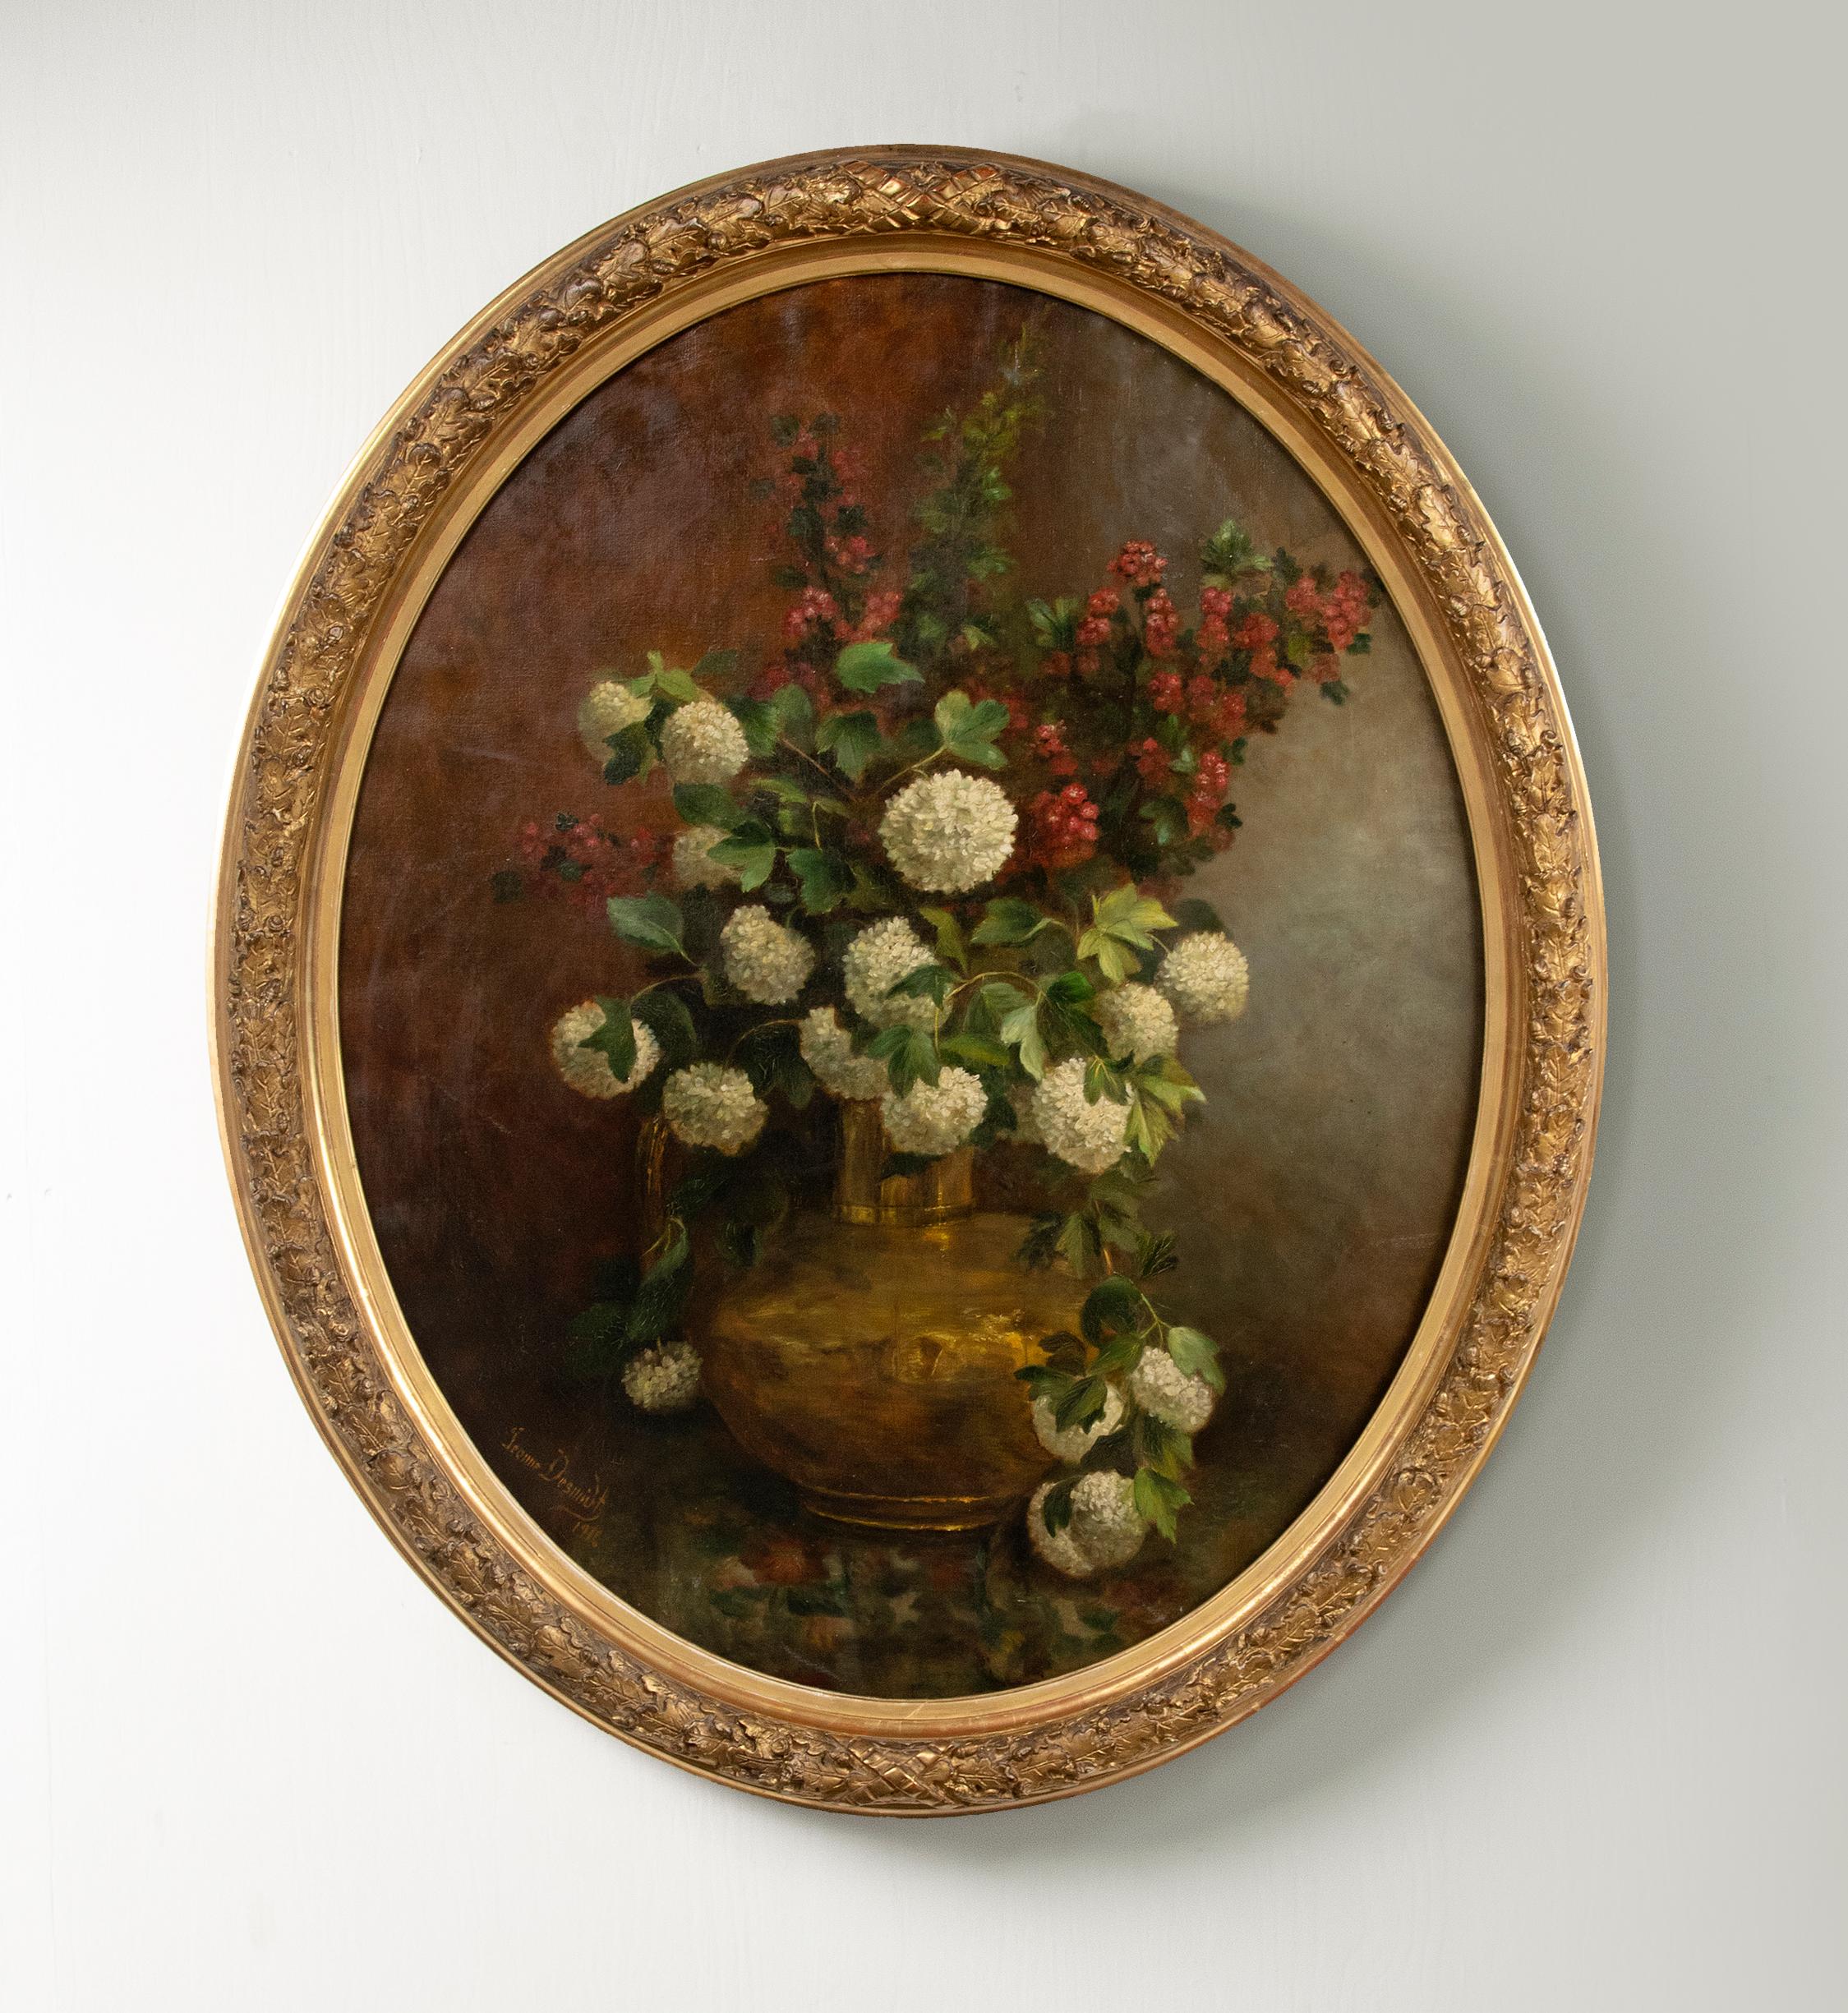 A refined oil painting on canvas of a flower still life. Depicting white Viburnum flowers in a copper pot. The painting is signed lower left by the Belgian Jeanne Desmidt, a female artist. And dated 1916. The painting has the original frame. It is